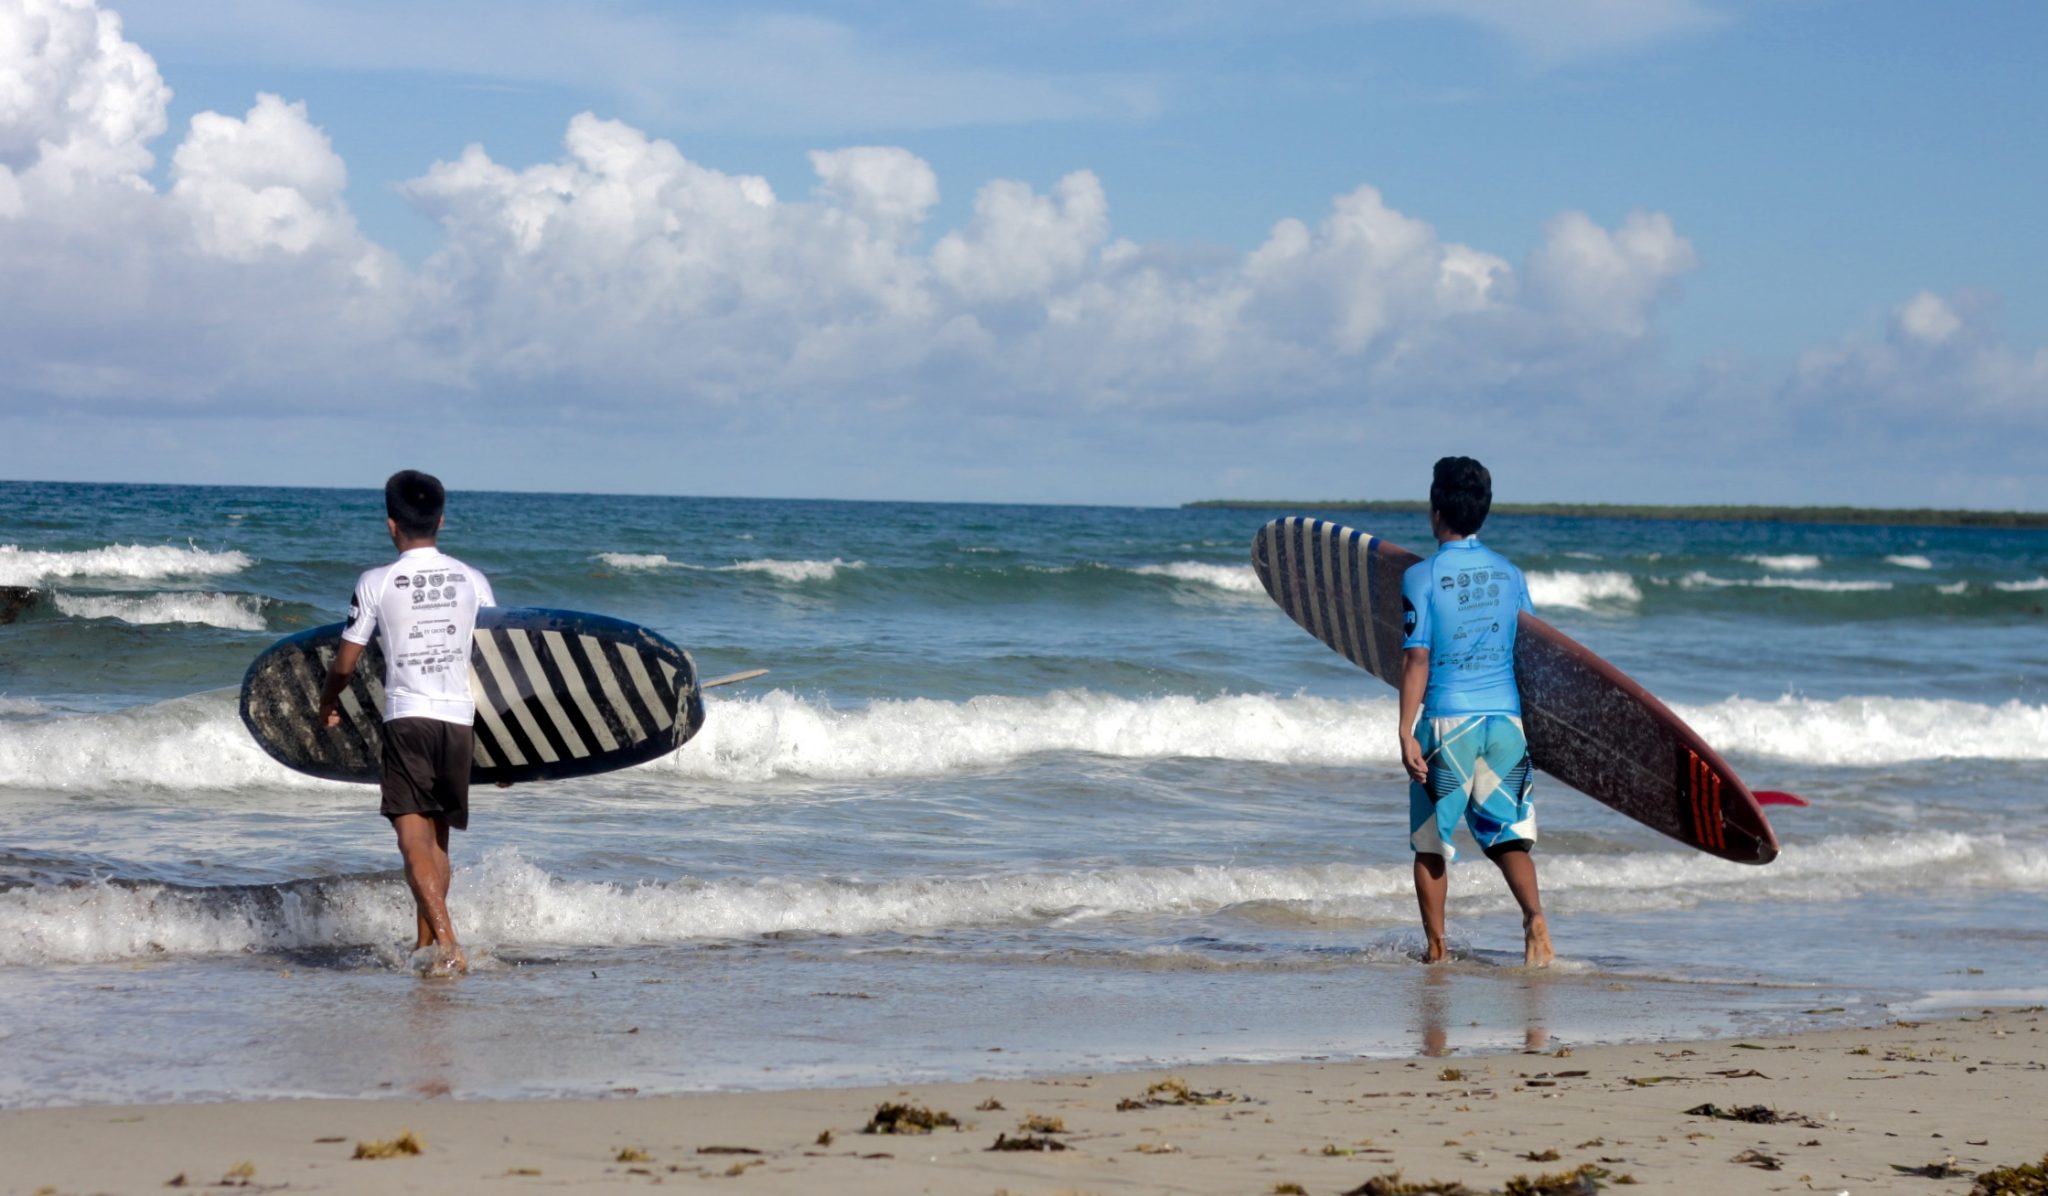 The key to keeping children away from bad habits is to involve them in sports such as surfing